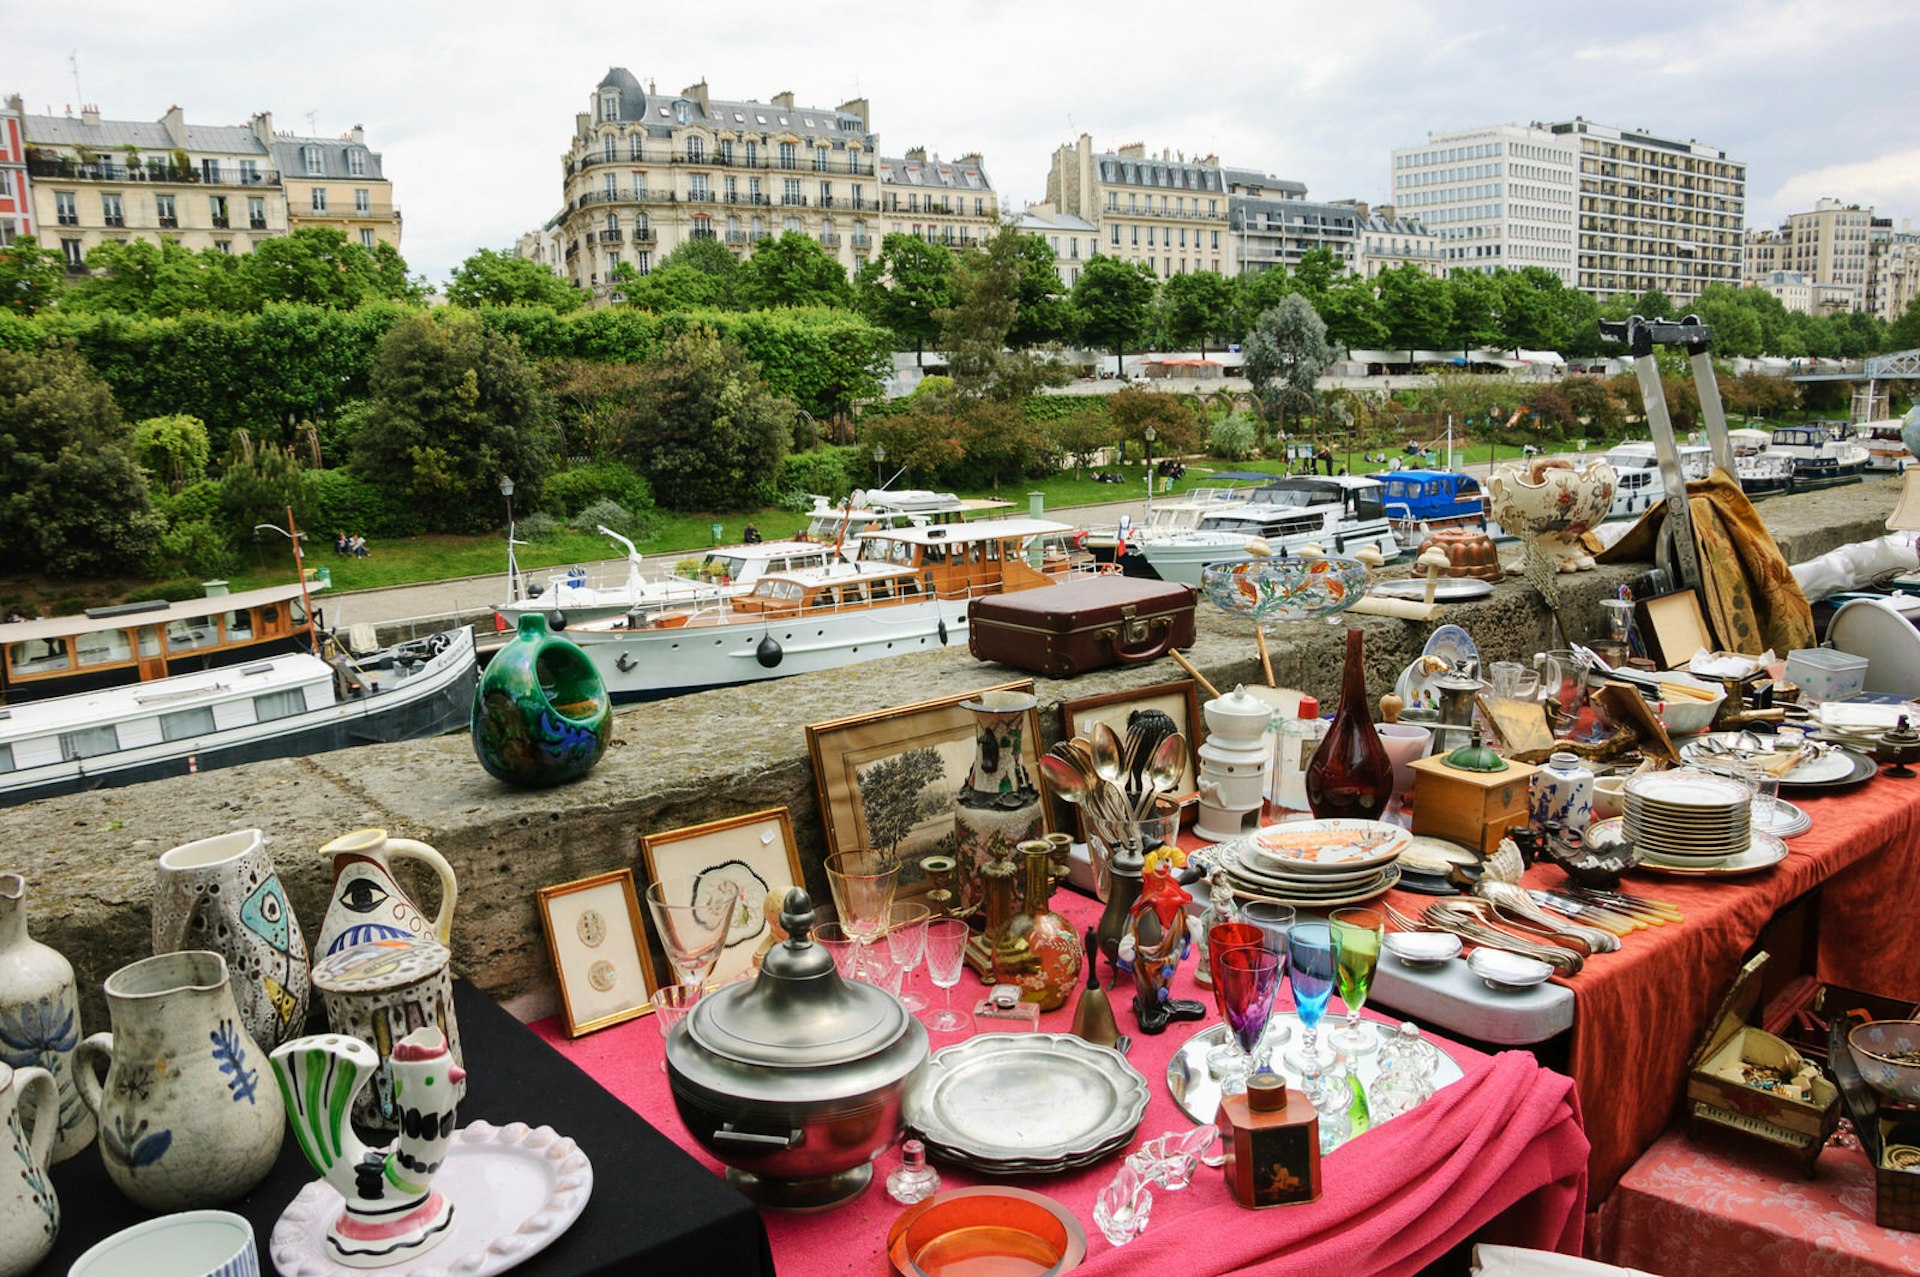 Paris markets - Several tables hold objects such as glasses, picture frames, bowls and dishes alongside the canal